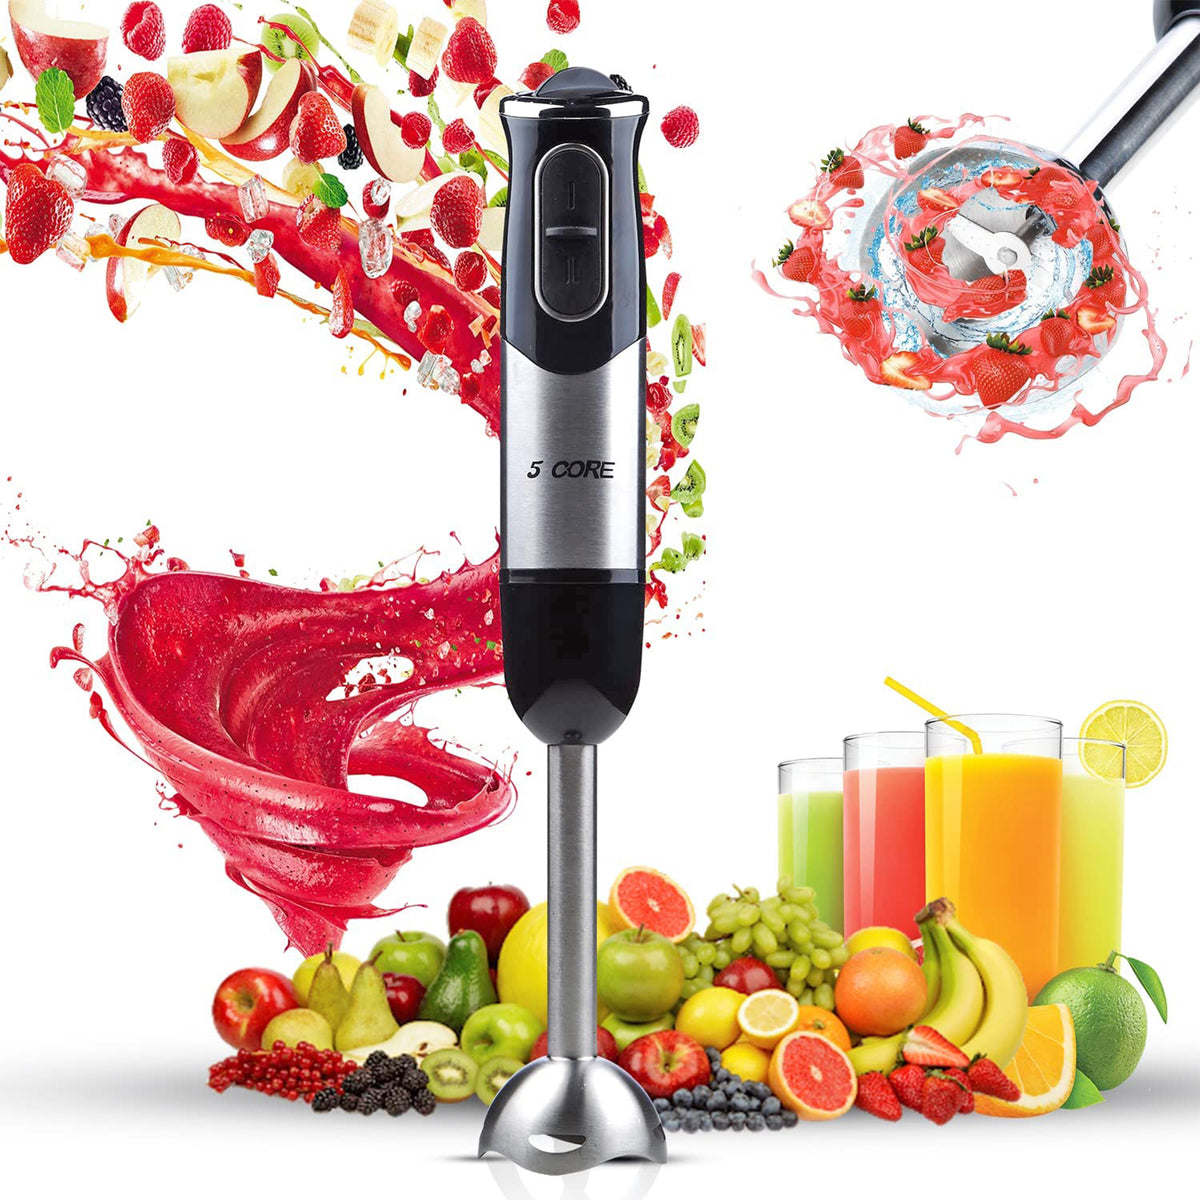 '5 Core Handheld Blender'

To see the PRICE, please go to:
pepperkitchenshop.com/products/view/…

#kitchengadgets #kitchentools #kitchenware #kitchenutensils #grater #peeler #potatomasher #food #applecorer #doughcutter #pizzacutter #eggseparator #teastrainer